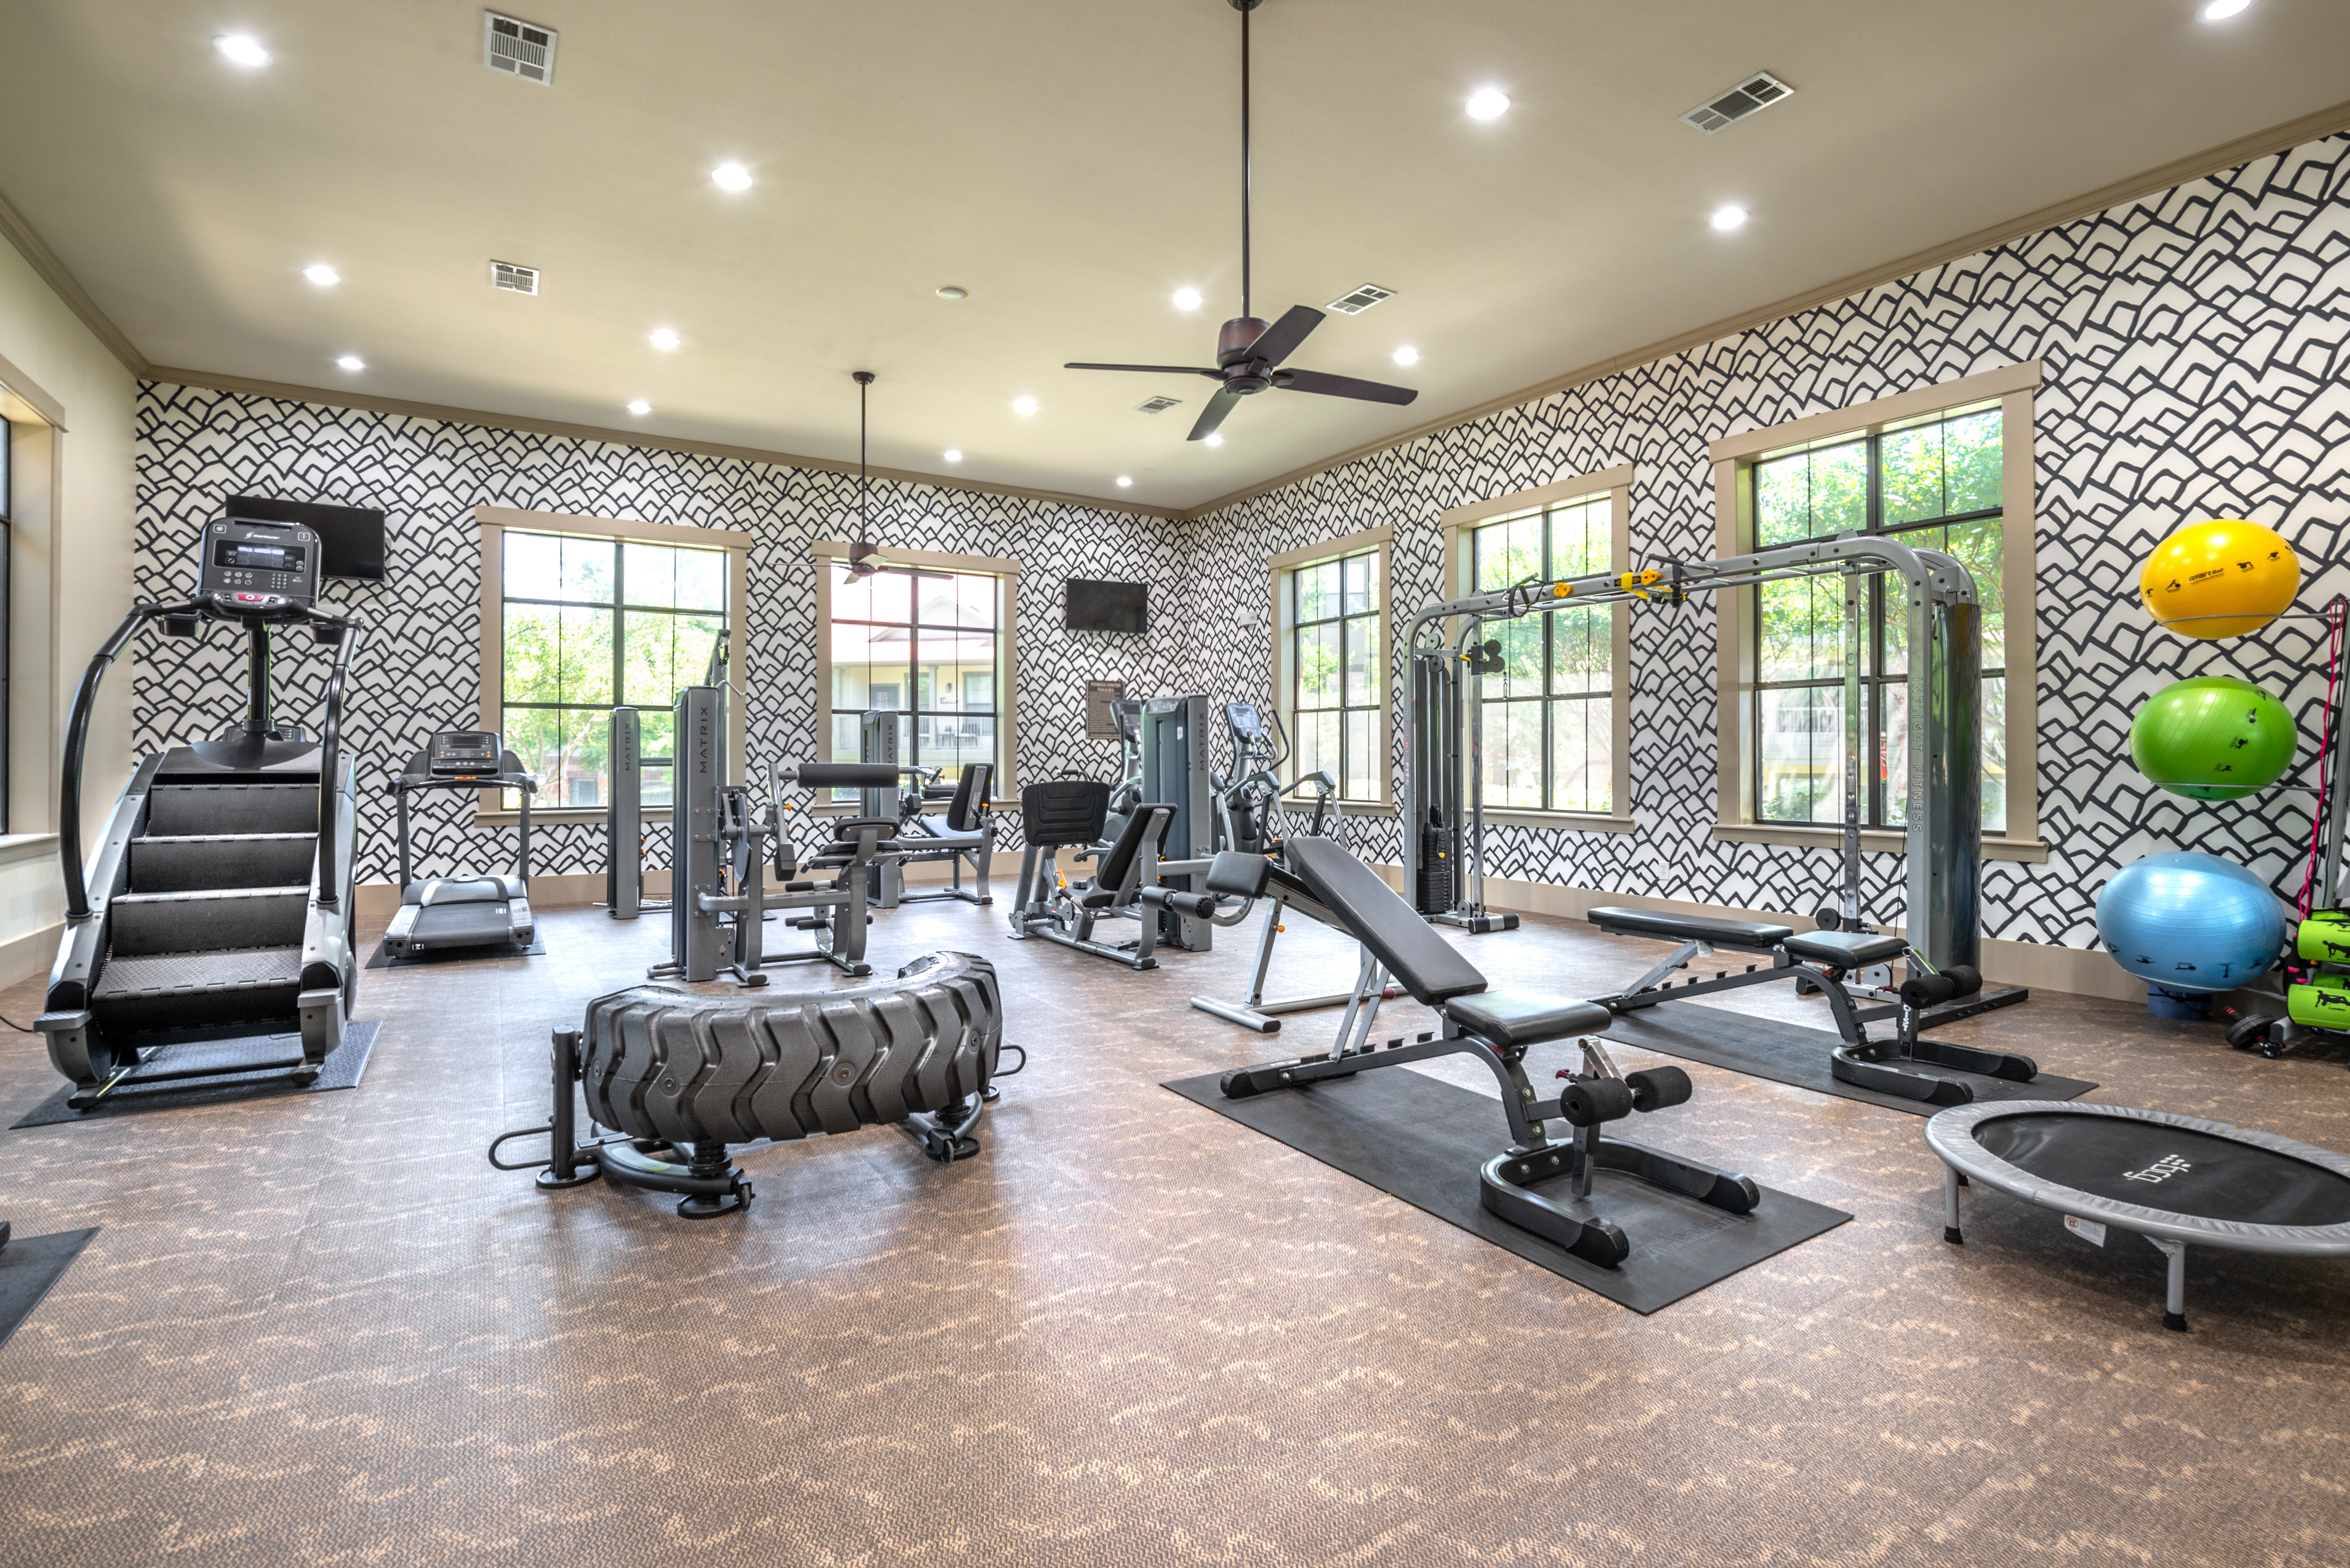 Well-equipped onsite fitness center at Olympus Team Ranch in Benbrook, Texas